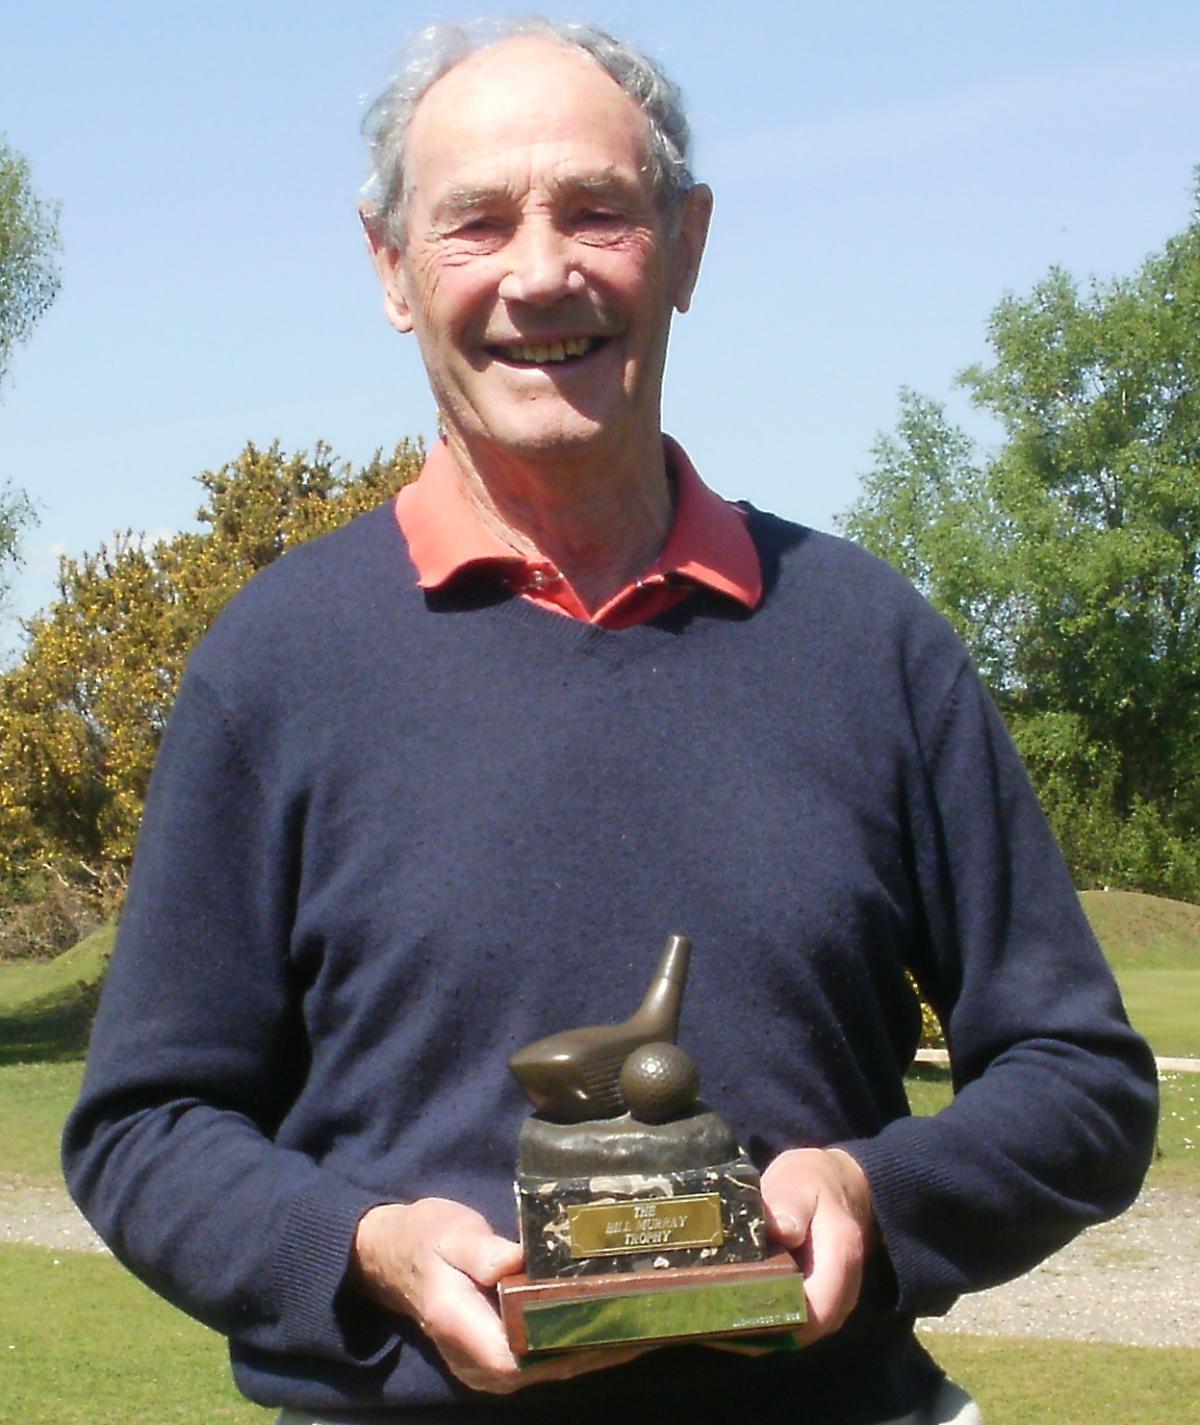 Coundon and Tyrrell take trophies at New Forest Golf Club | Daily Echo